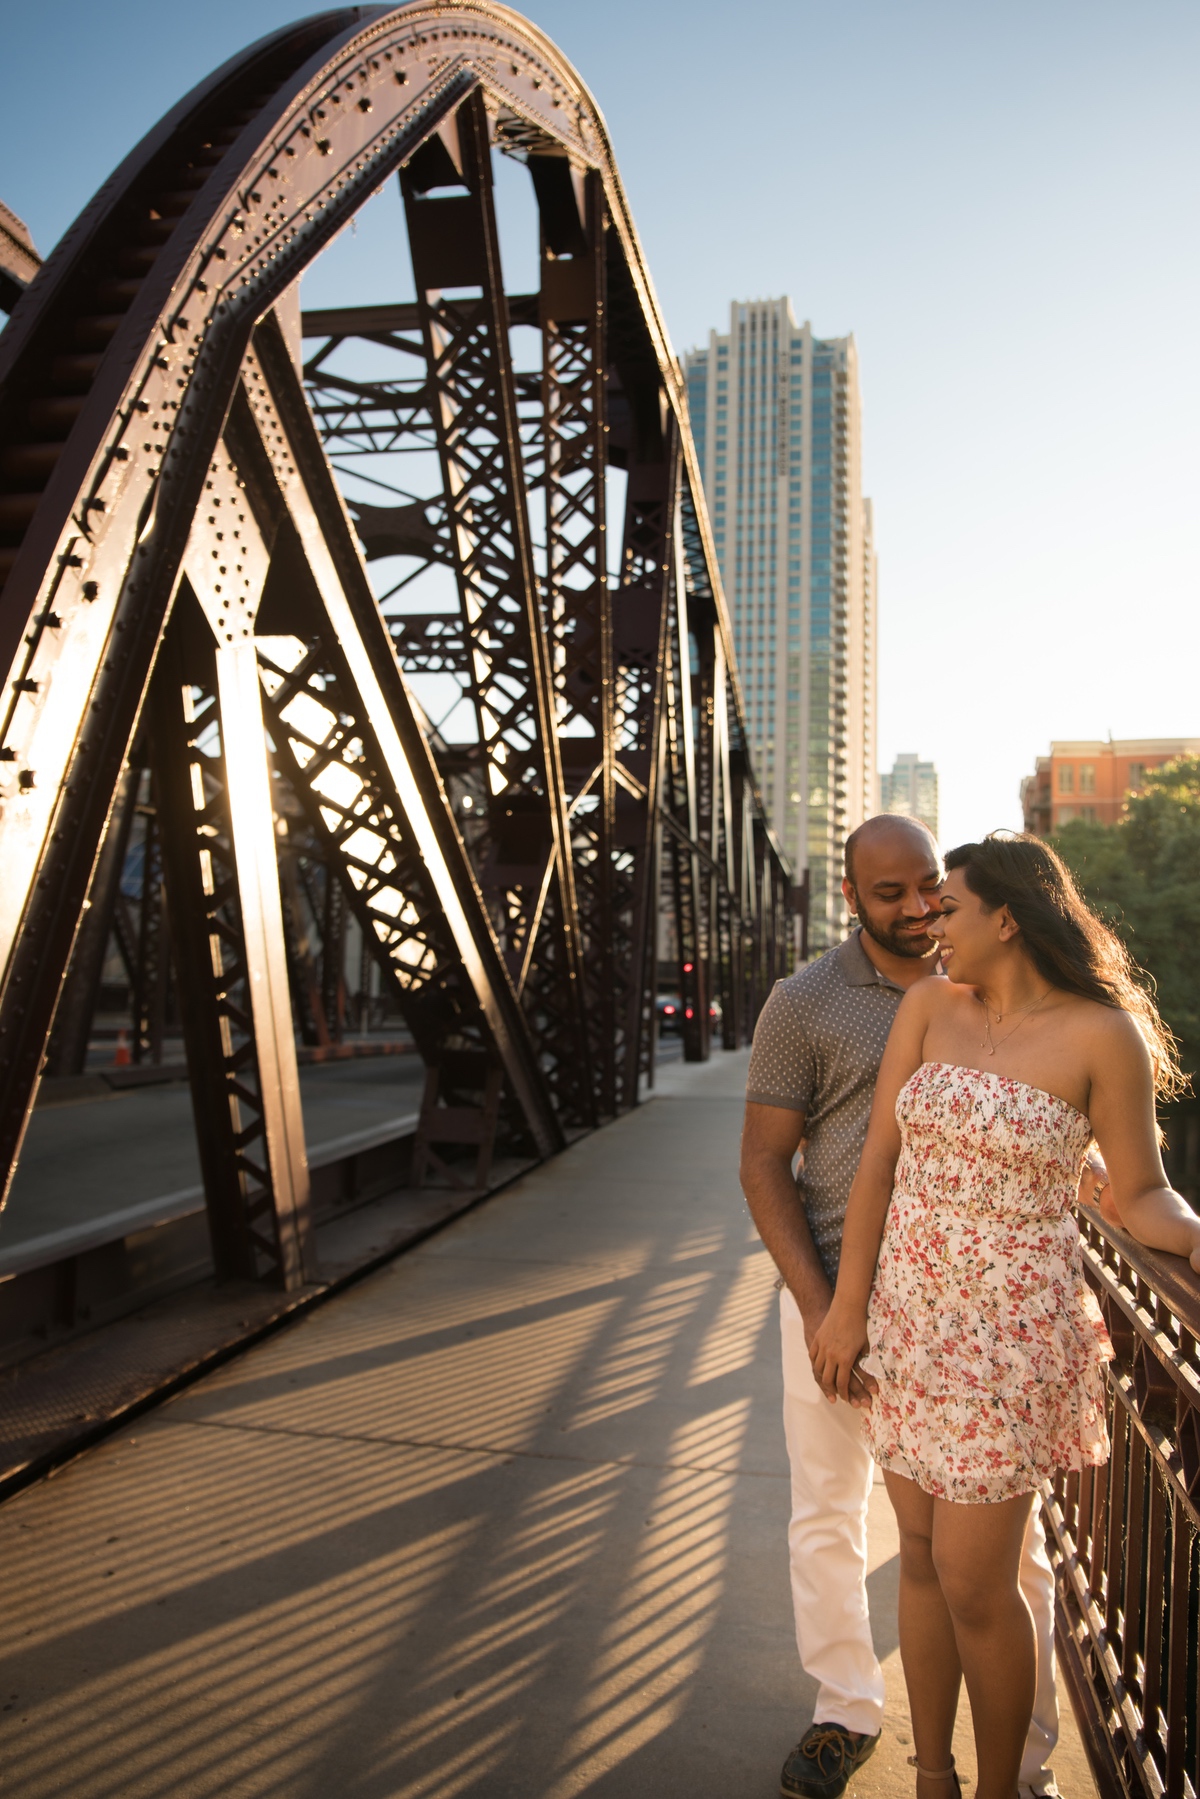 Le Cape Weddings - Engagement Session in Chicago - Brinjal-16.jpg